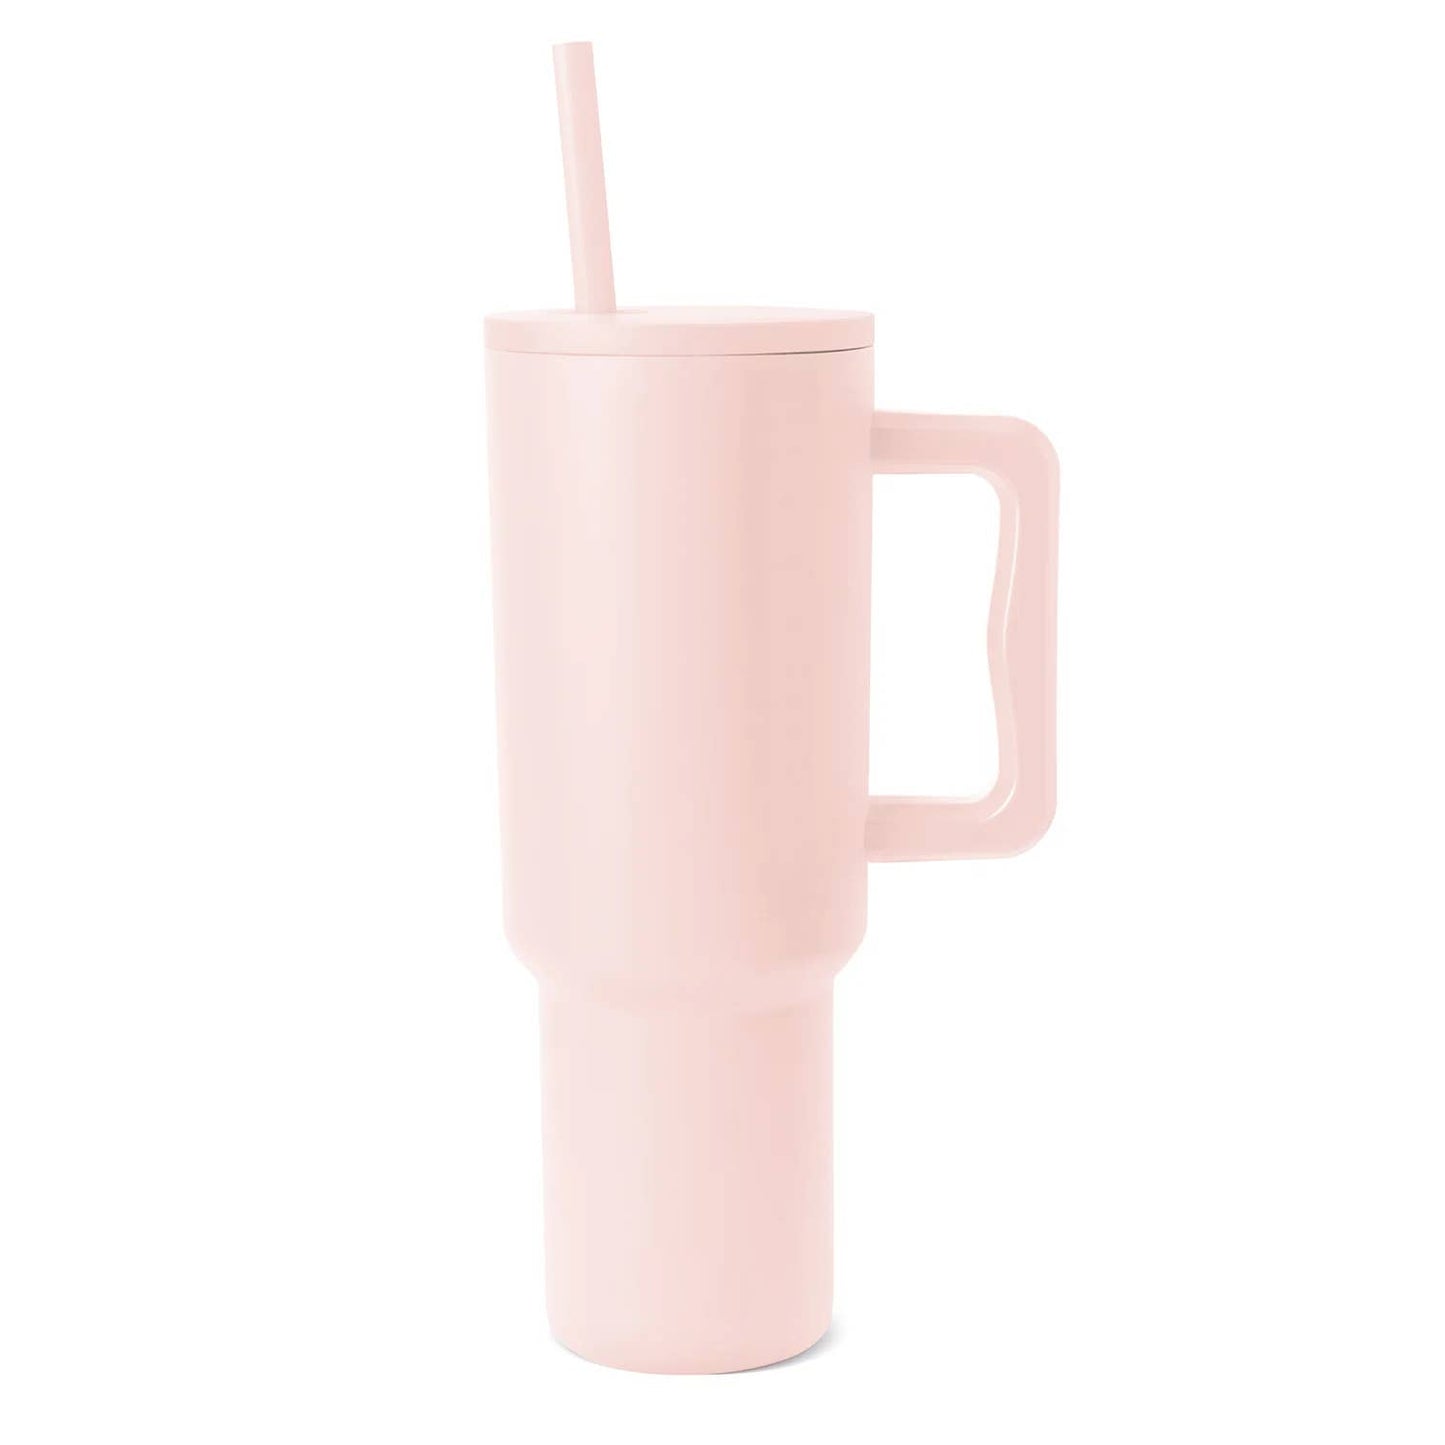 MODISH 40OZ TUMBLER WITH STRAW IN LIGHT PINK